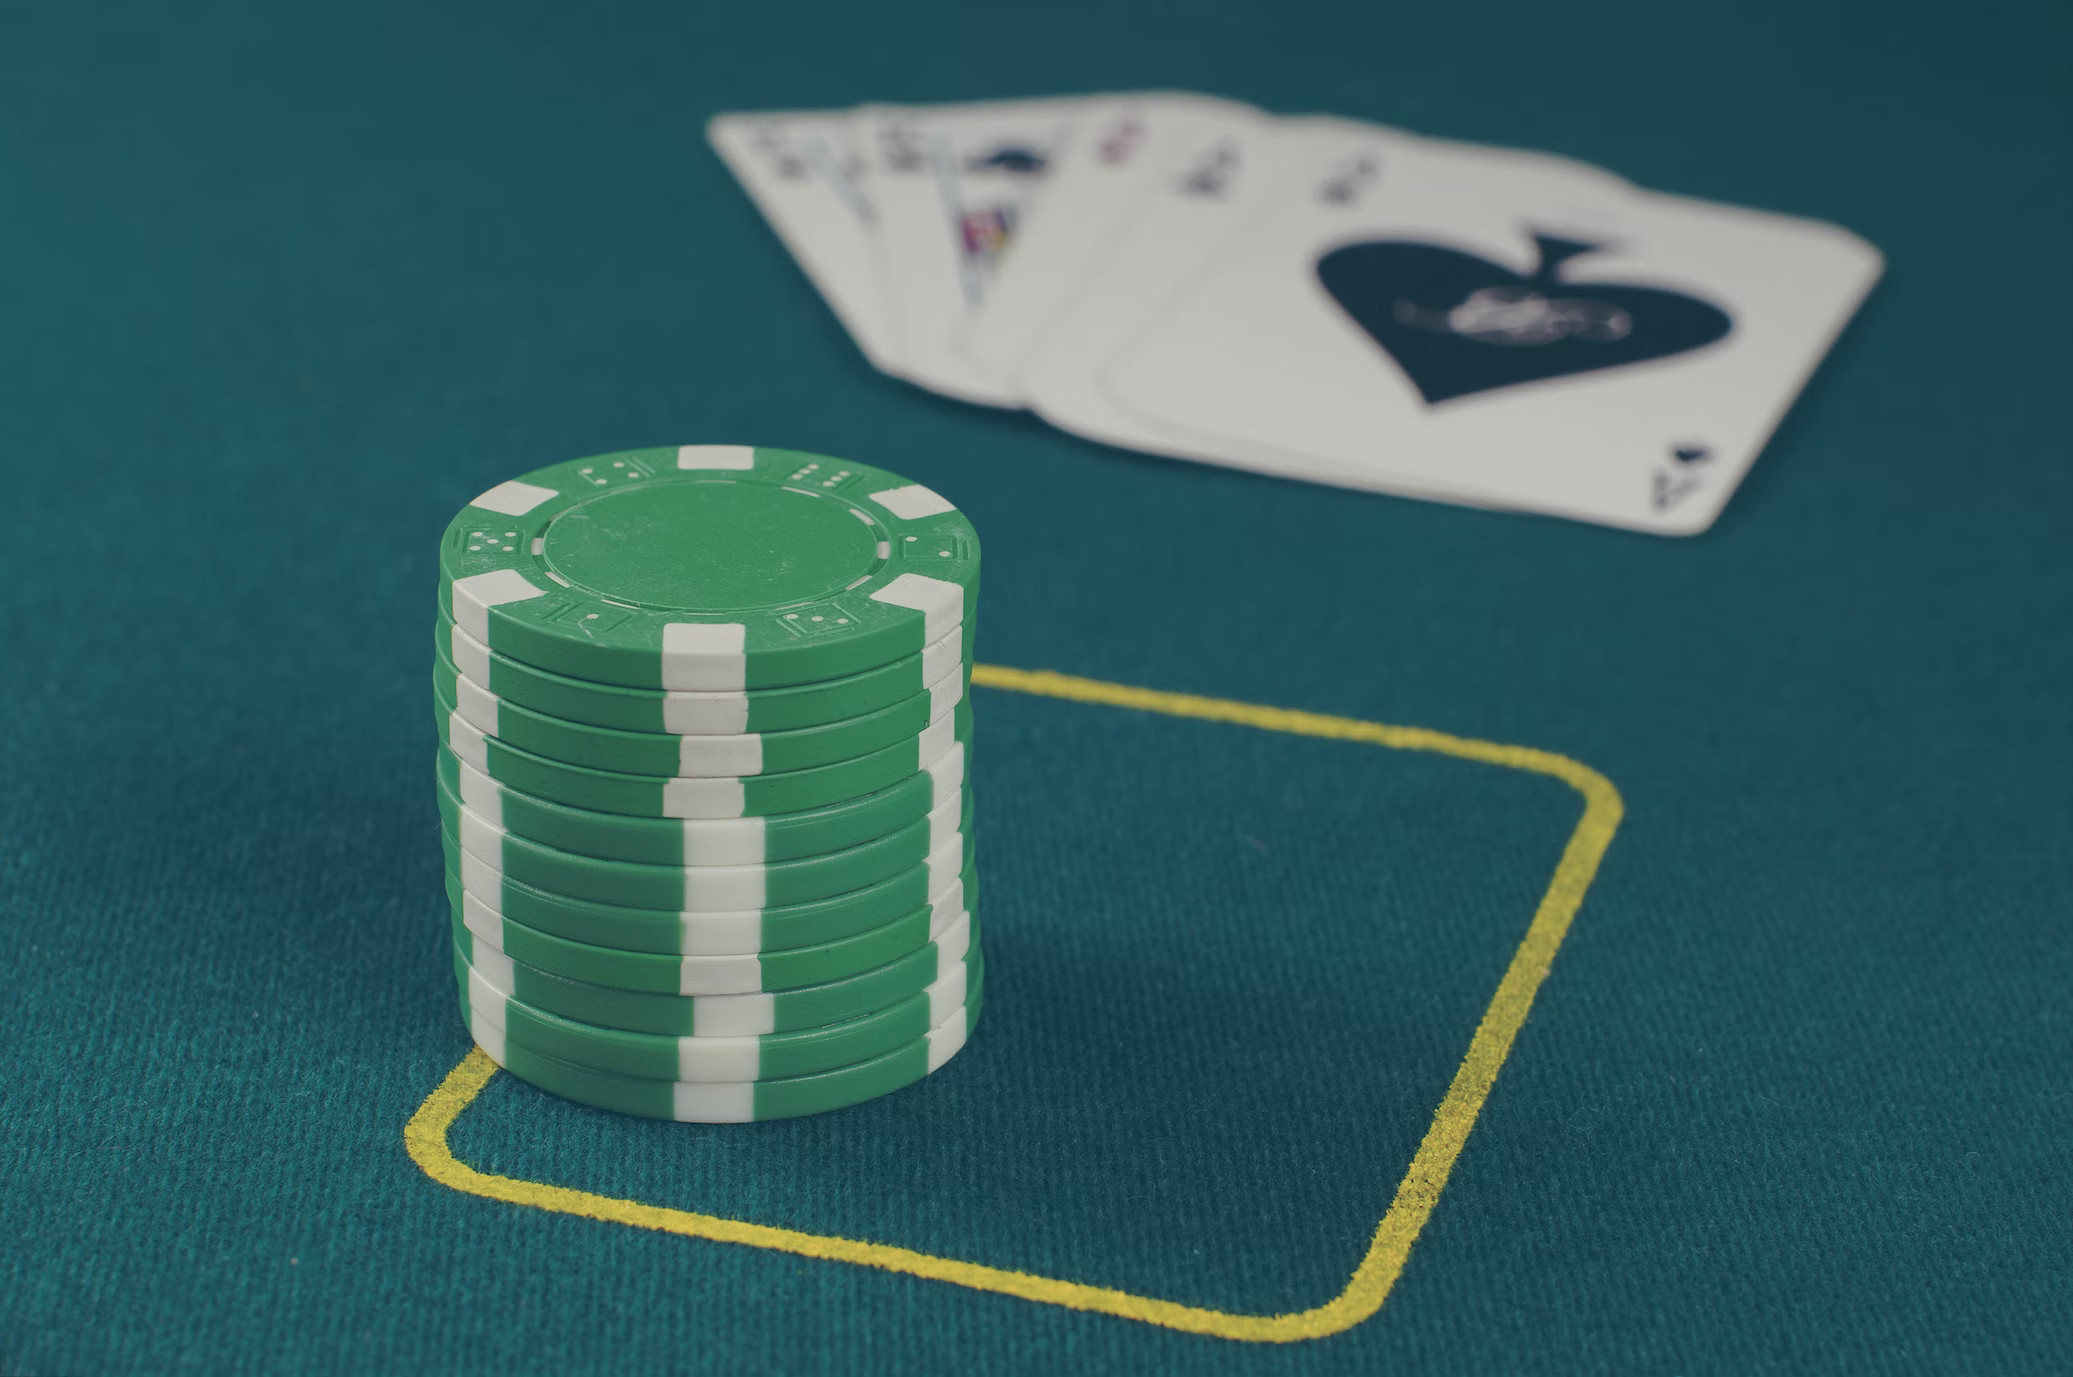 Online Poker Guide – How To Choose The Best Online Poker Game